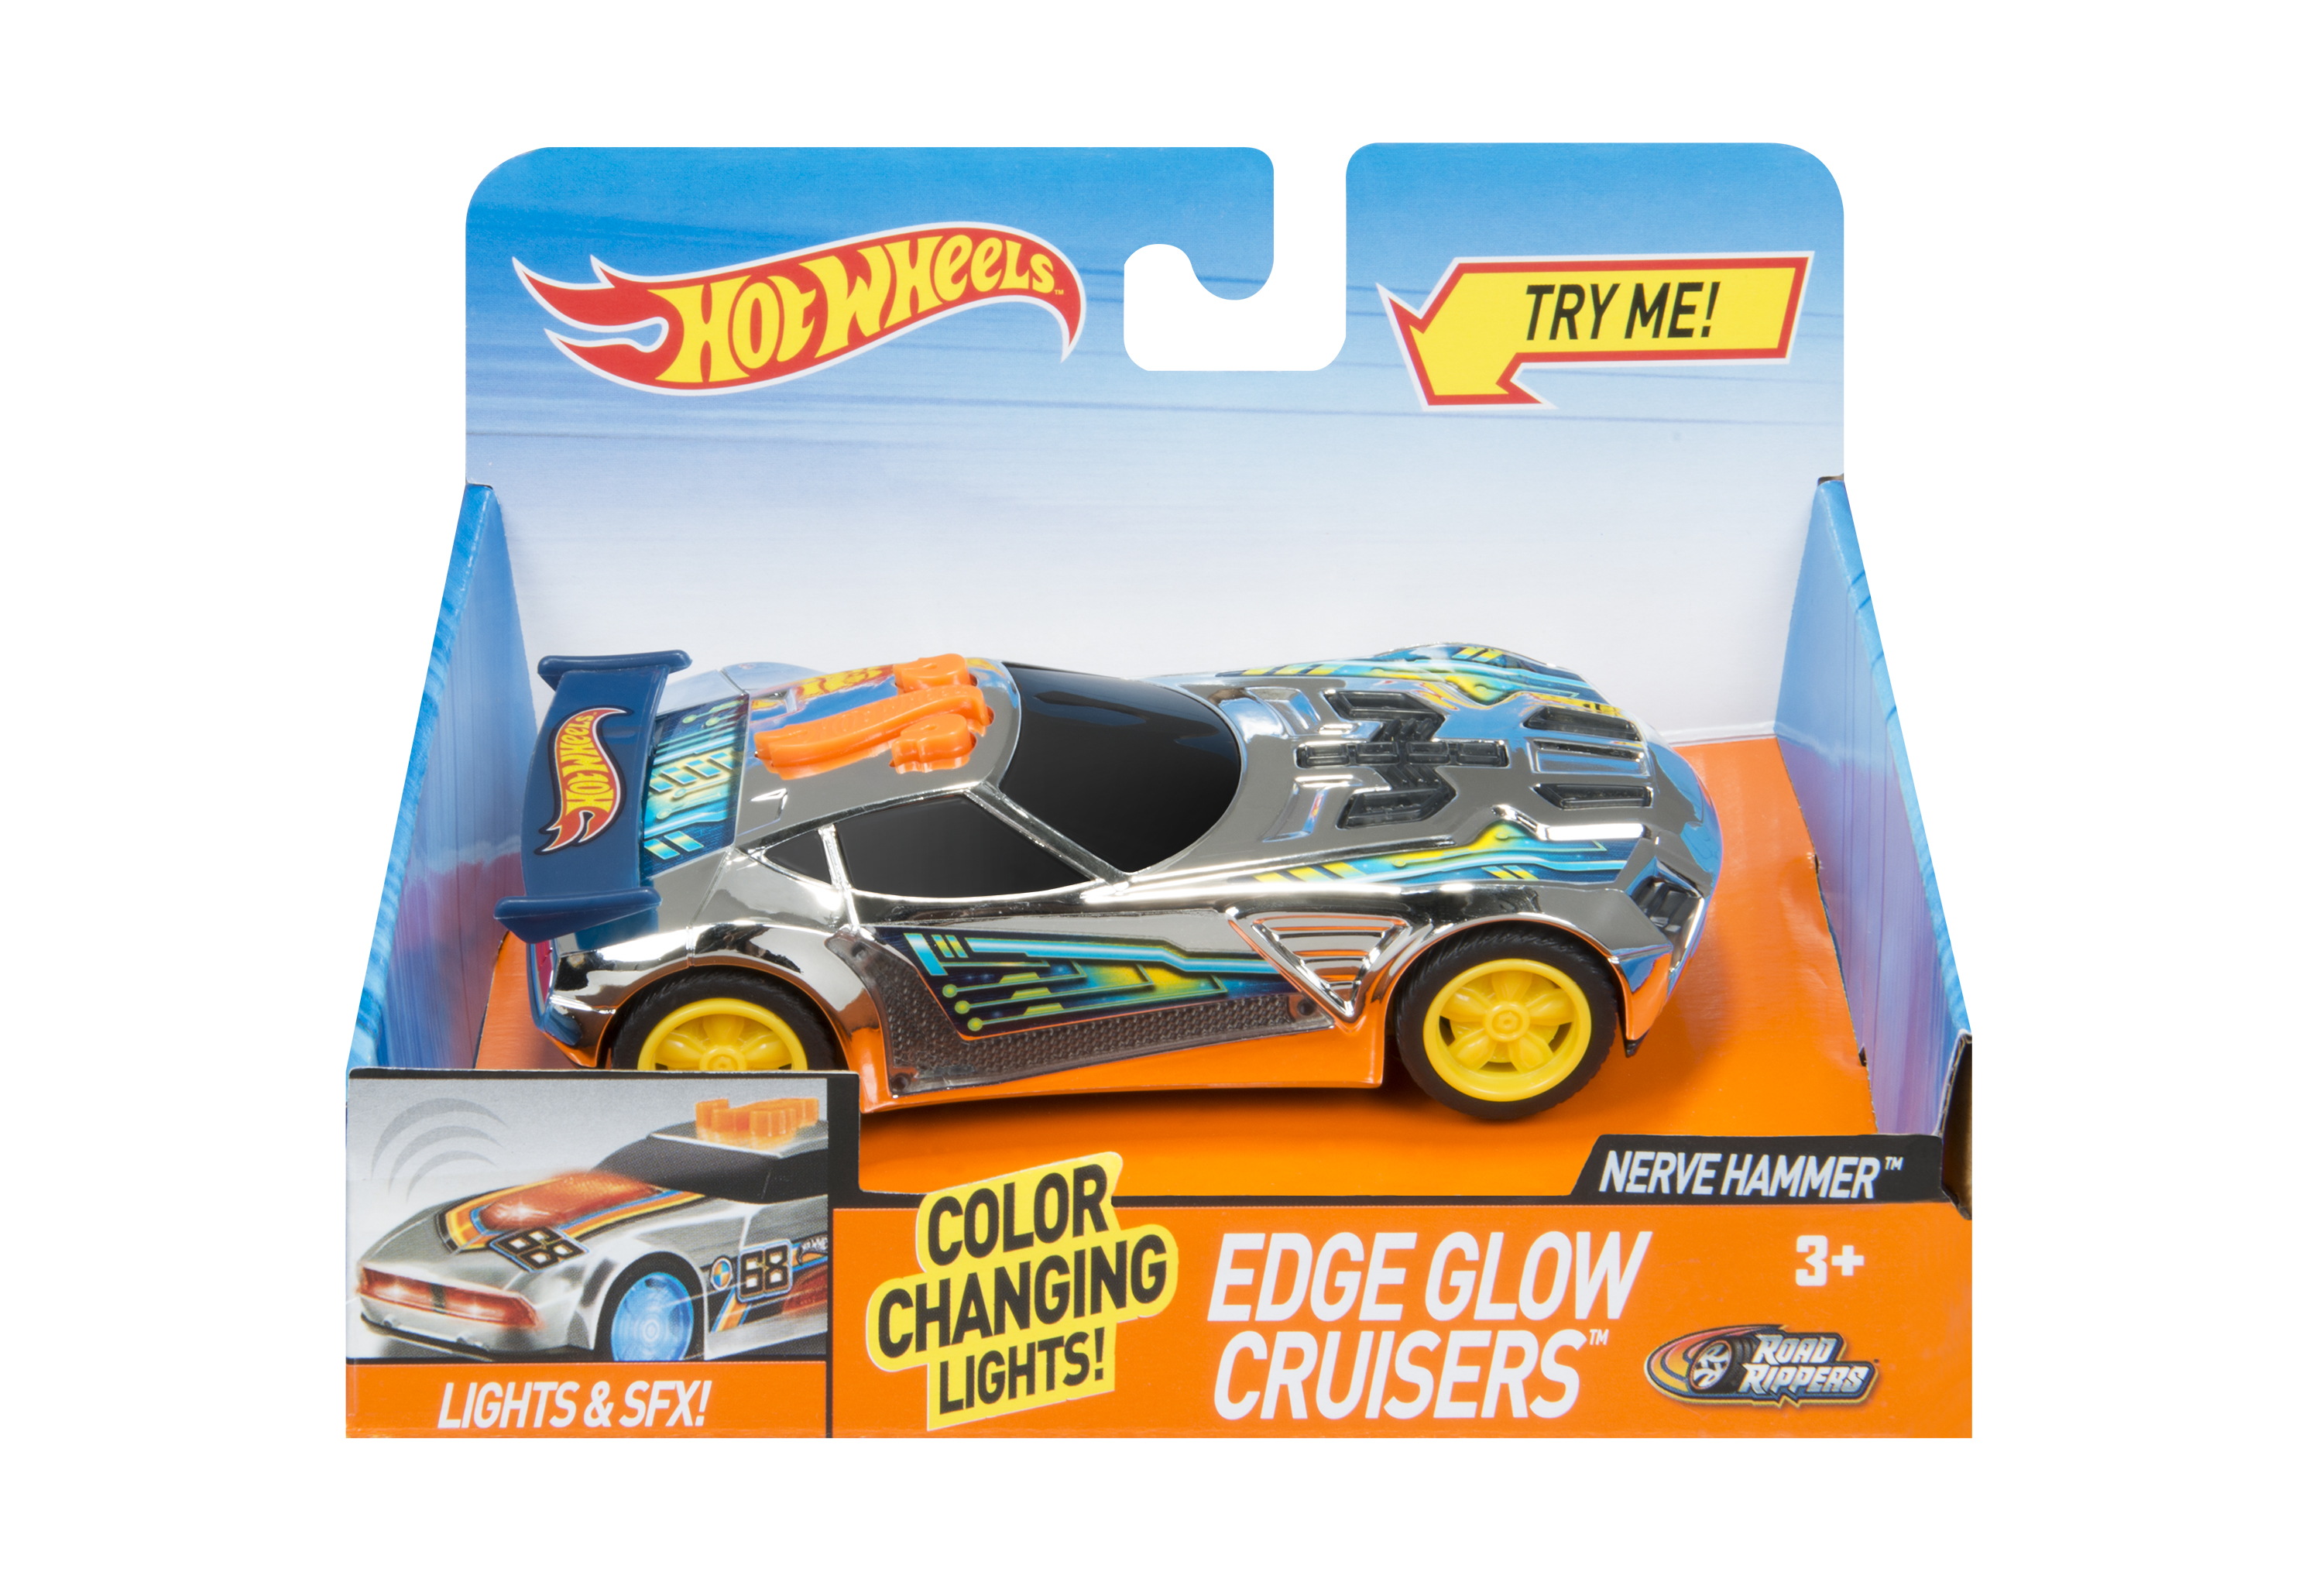 Hot Wheels Edge Glow Cruisers - Nerve Hammer with Lights and Sounds - image 4 of 4